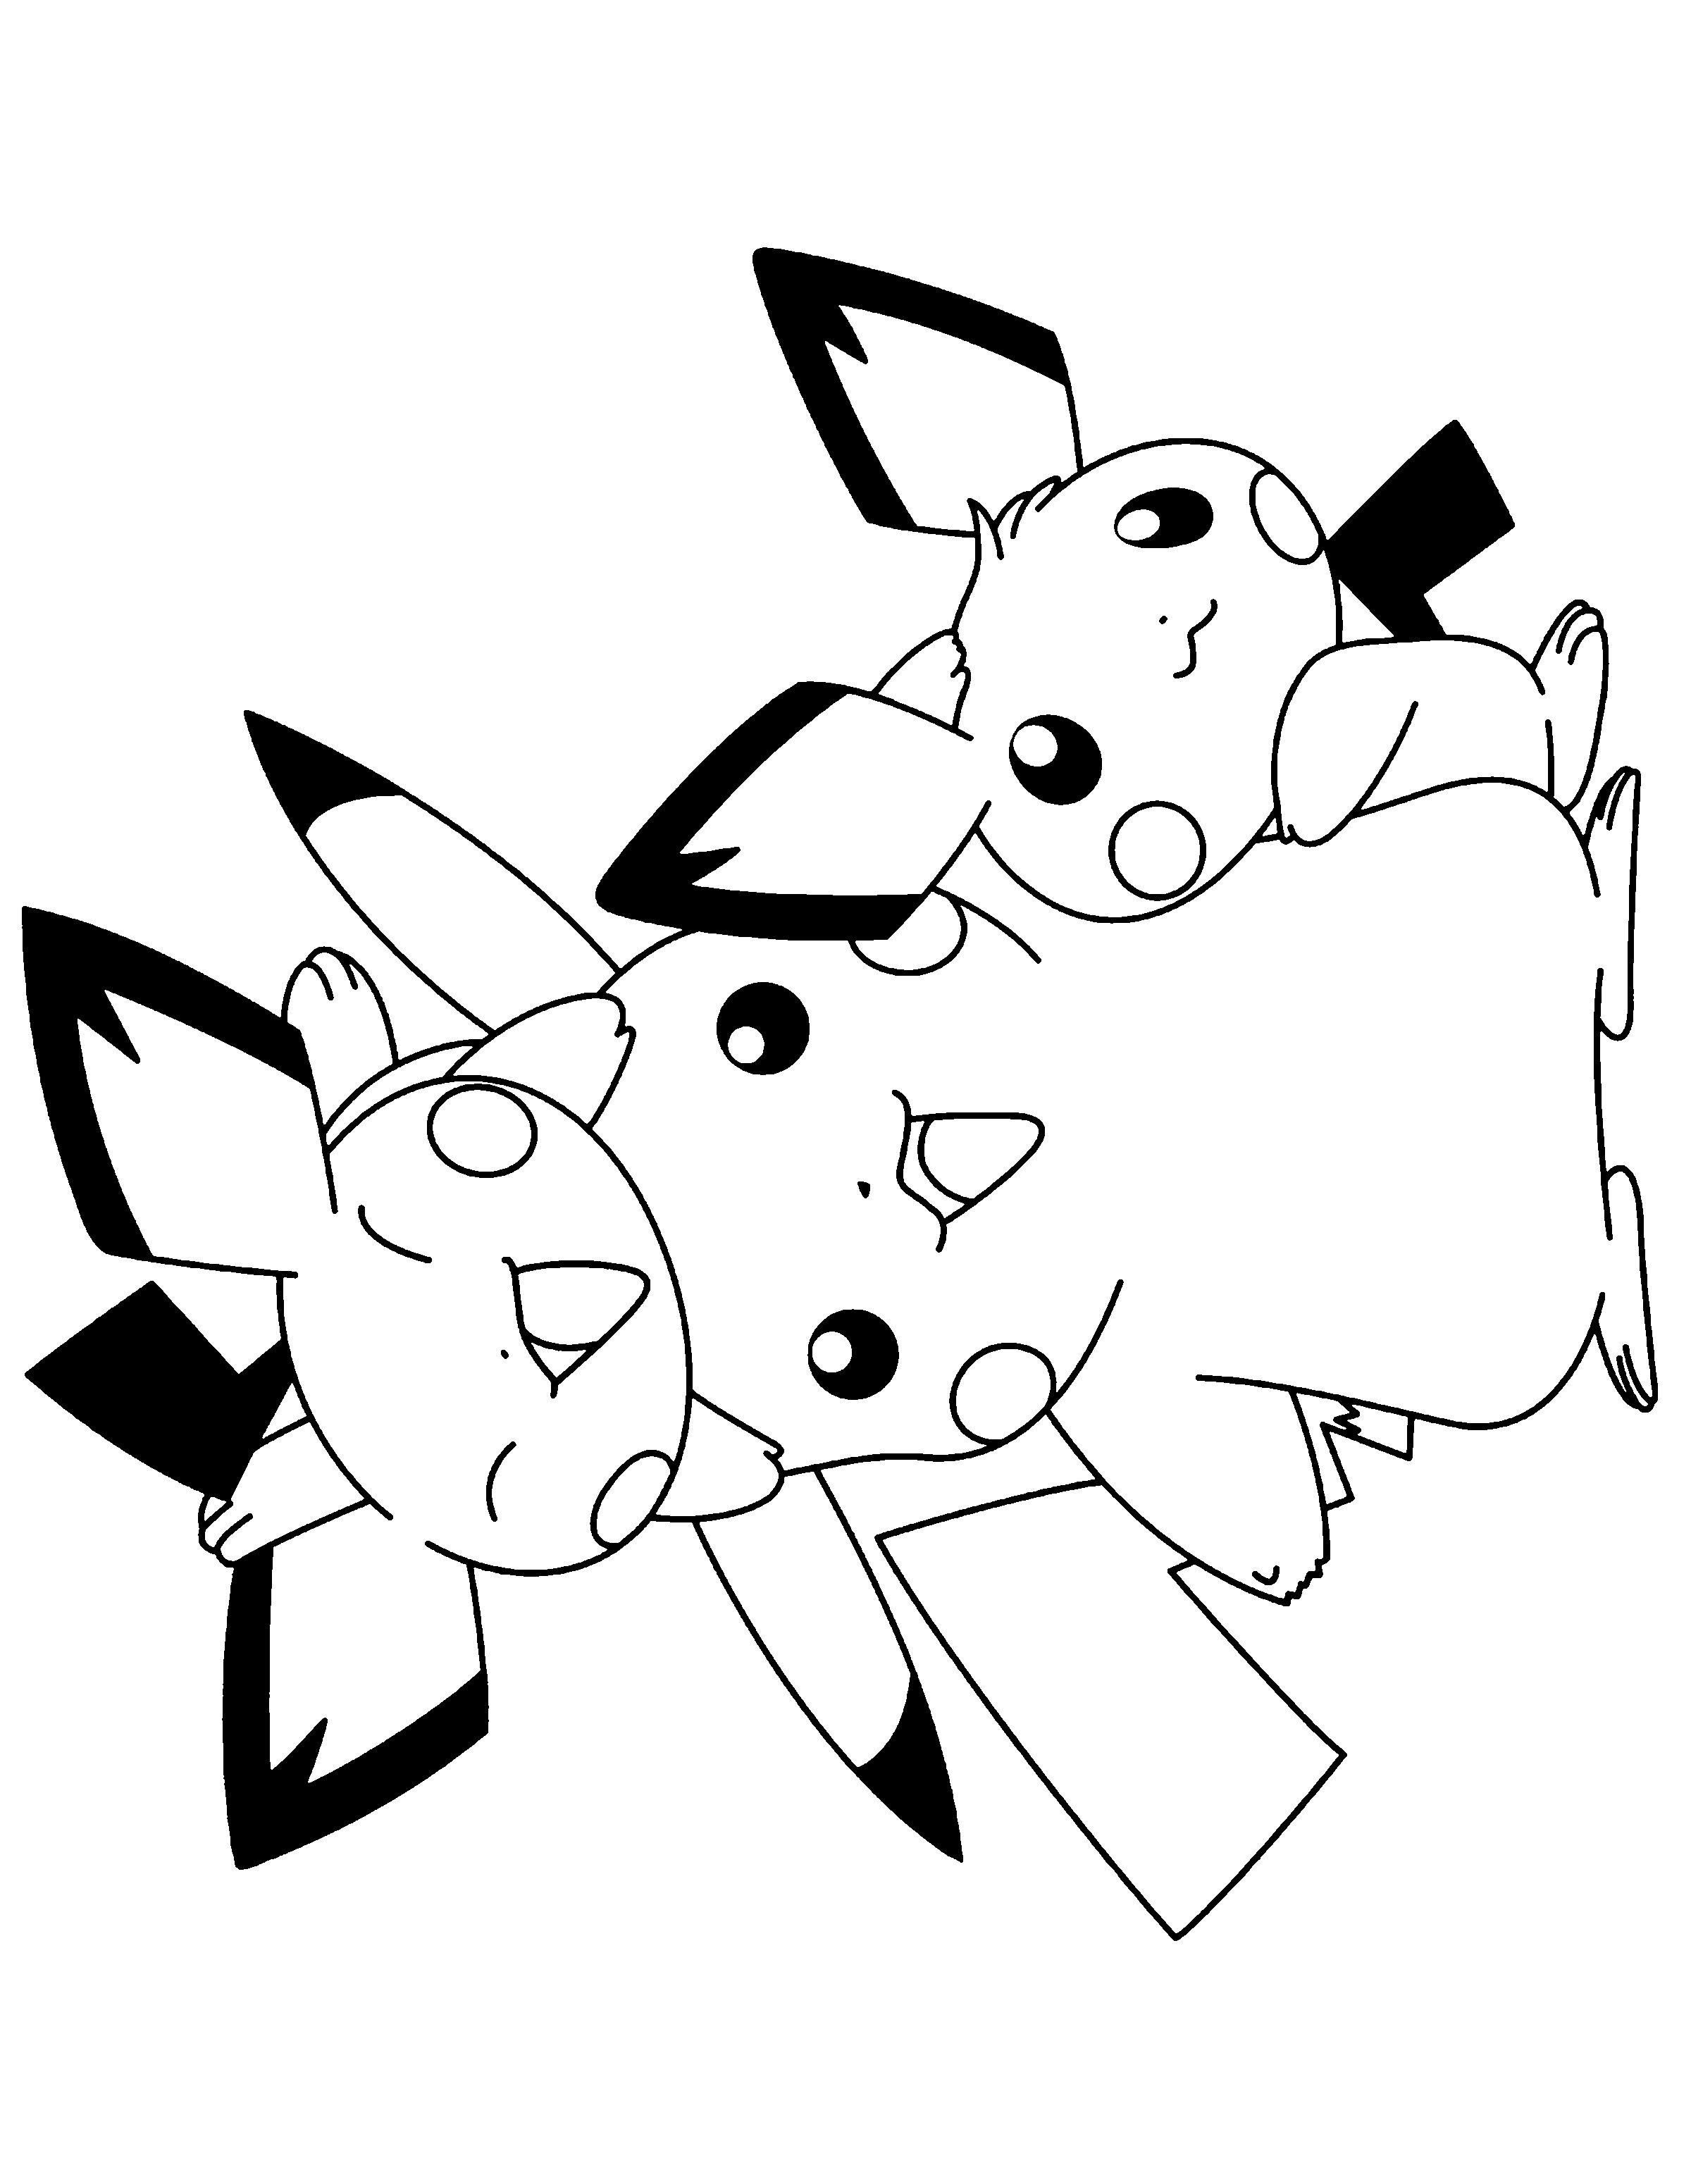 Pokemon Pichu Coloring Pages at GetColorings.com | Free printable